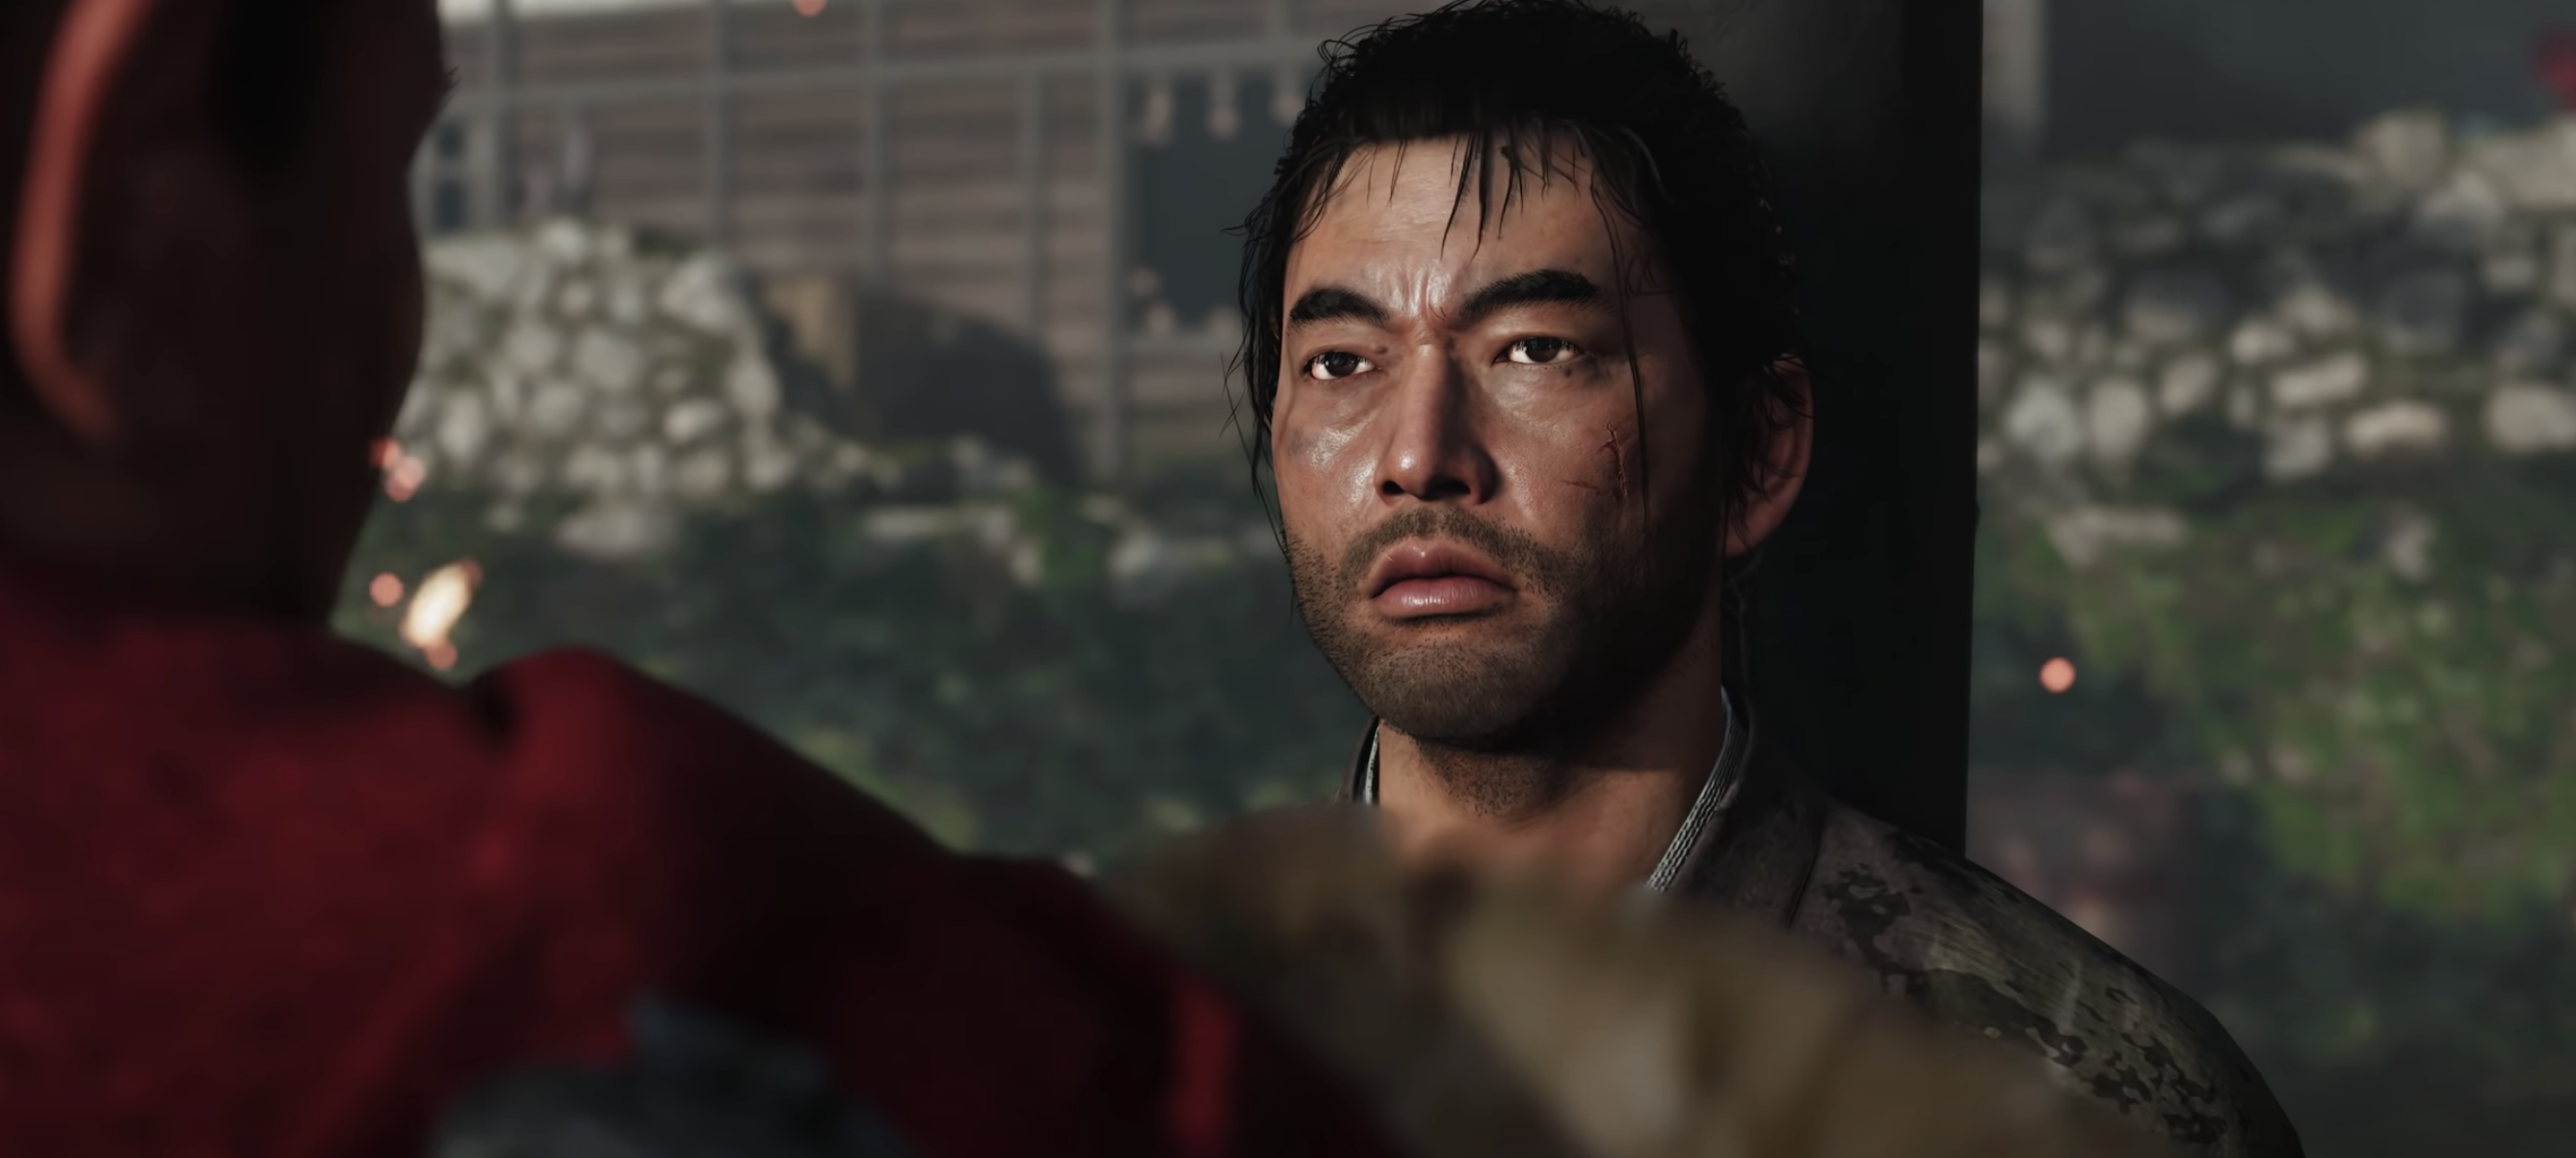 Ghost Of Tsushima 2 seemingly confirmed in job listings